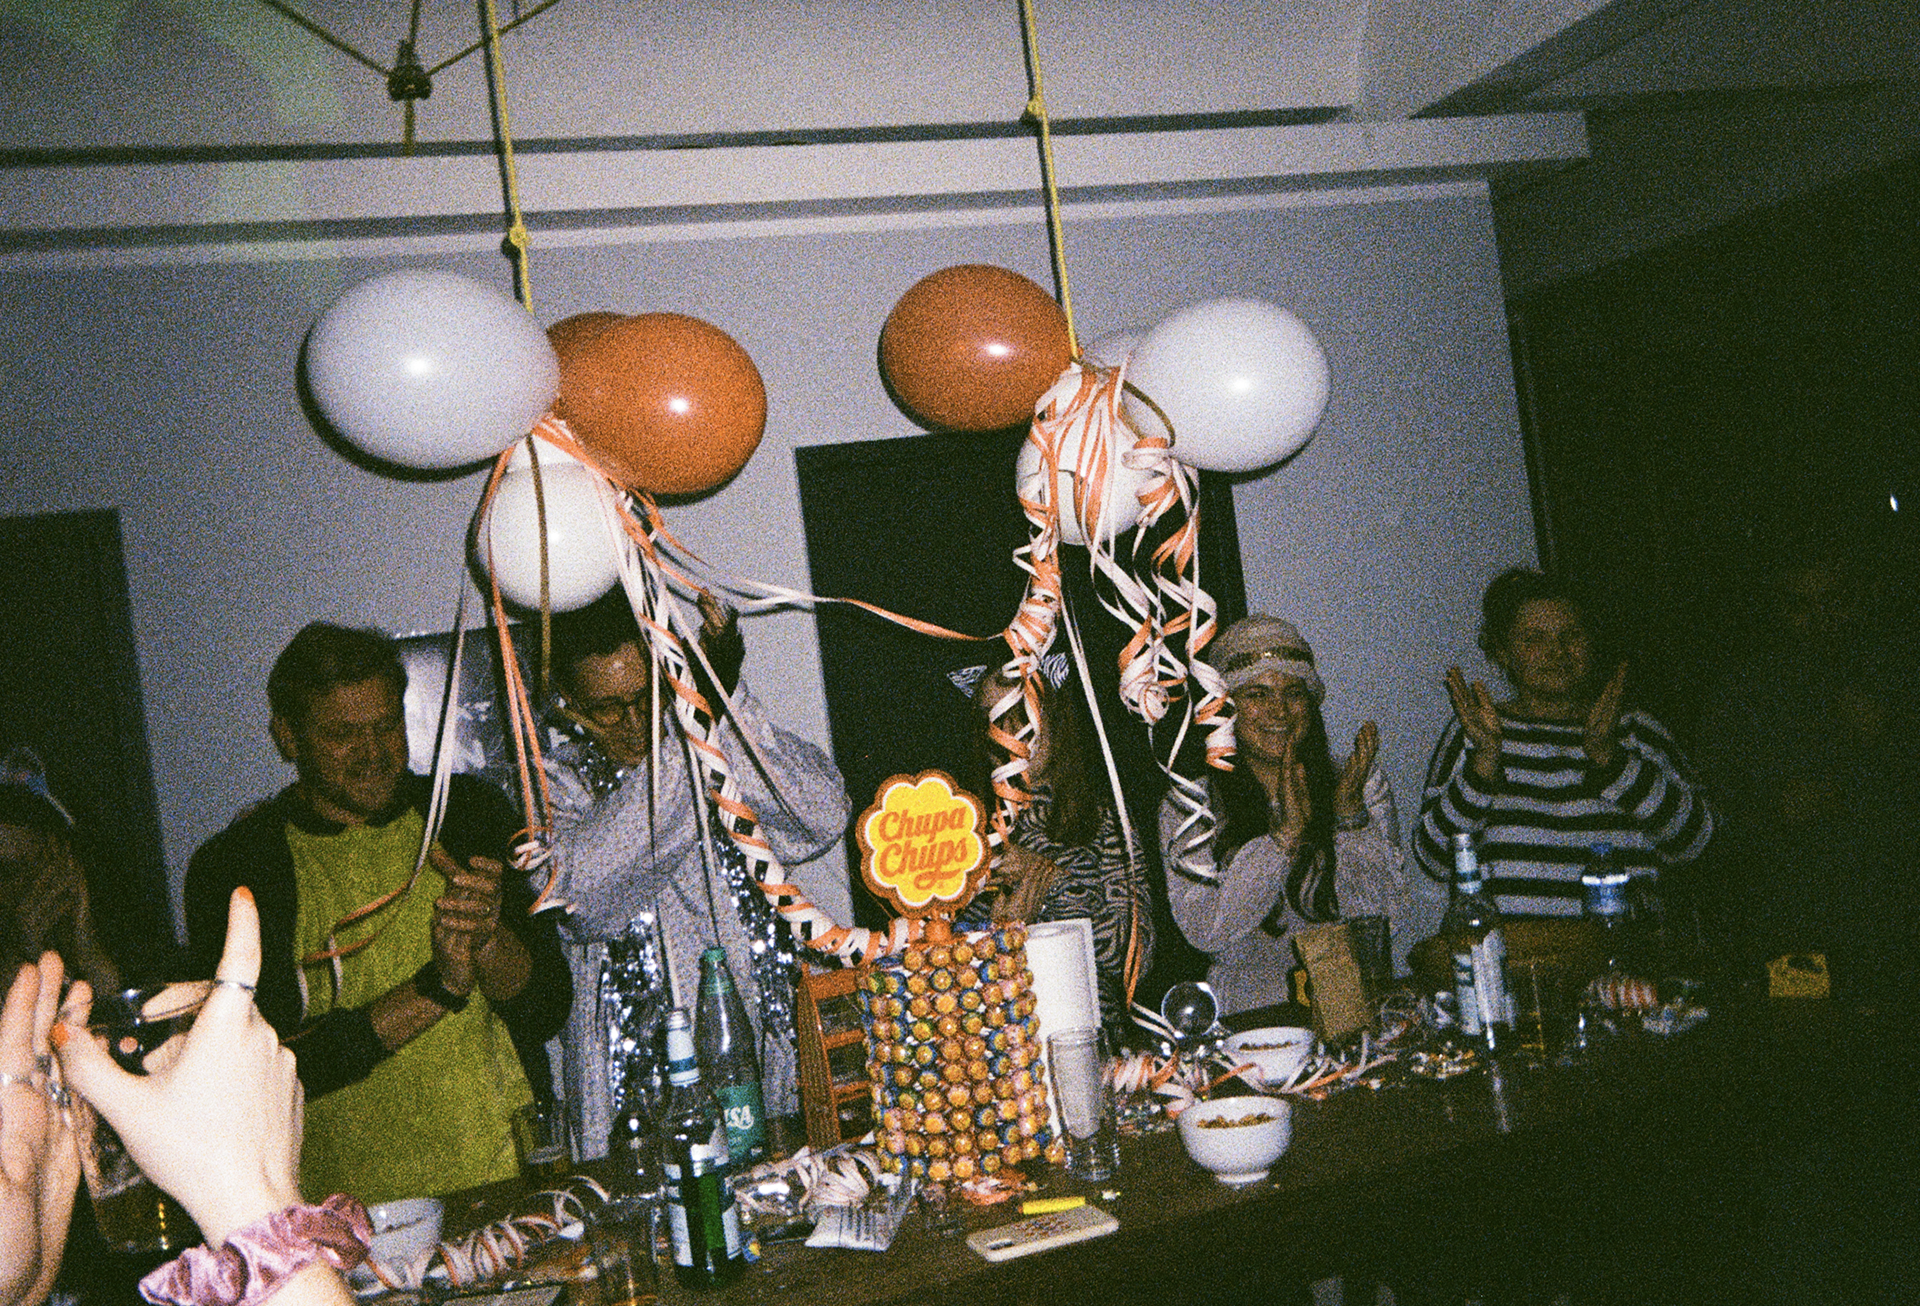 Employees of Jung von matt Hamburg having a party with baloons and decoration hanging from the ceiling